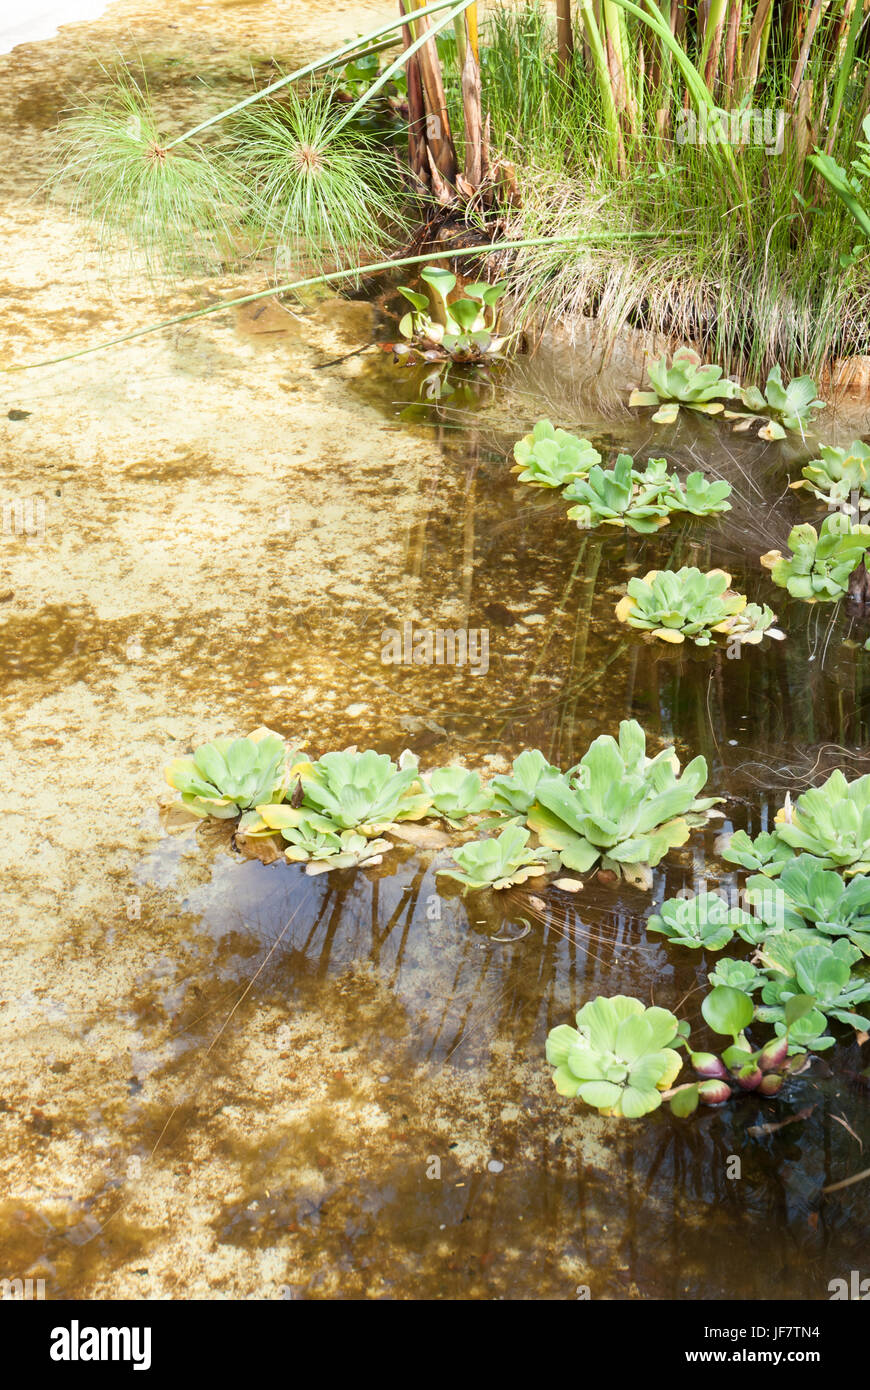 Water lettuce or water cabagge (Pistia stratiotes) floating in a pond Stock Photo